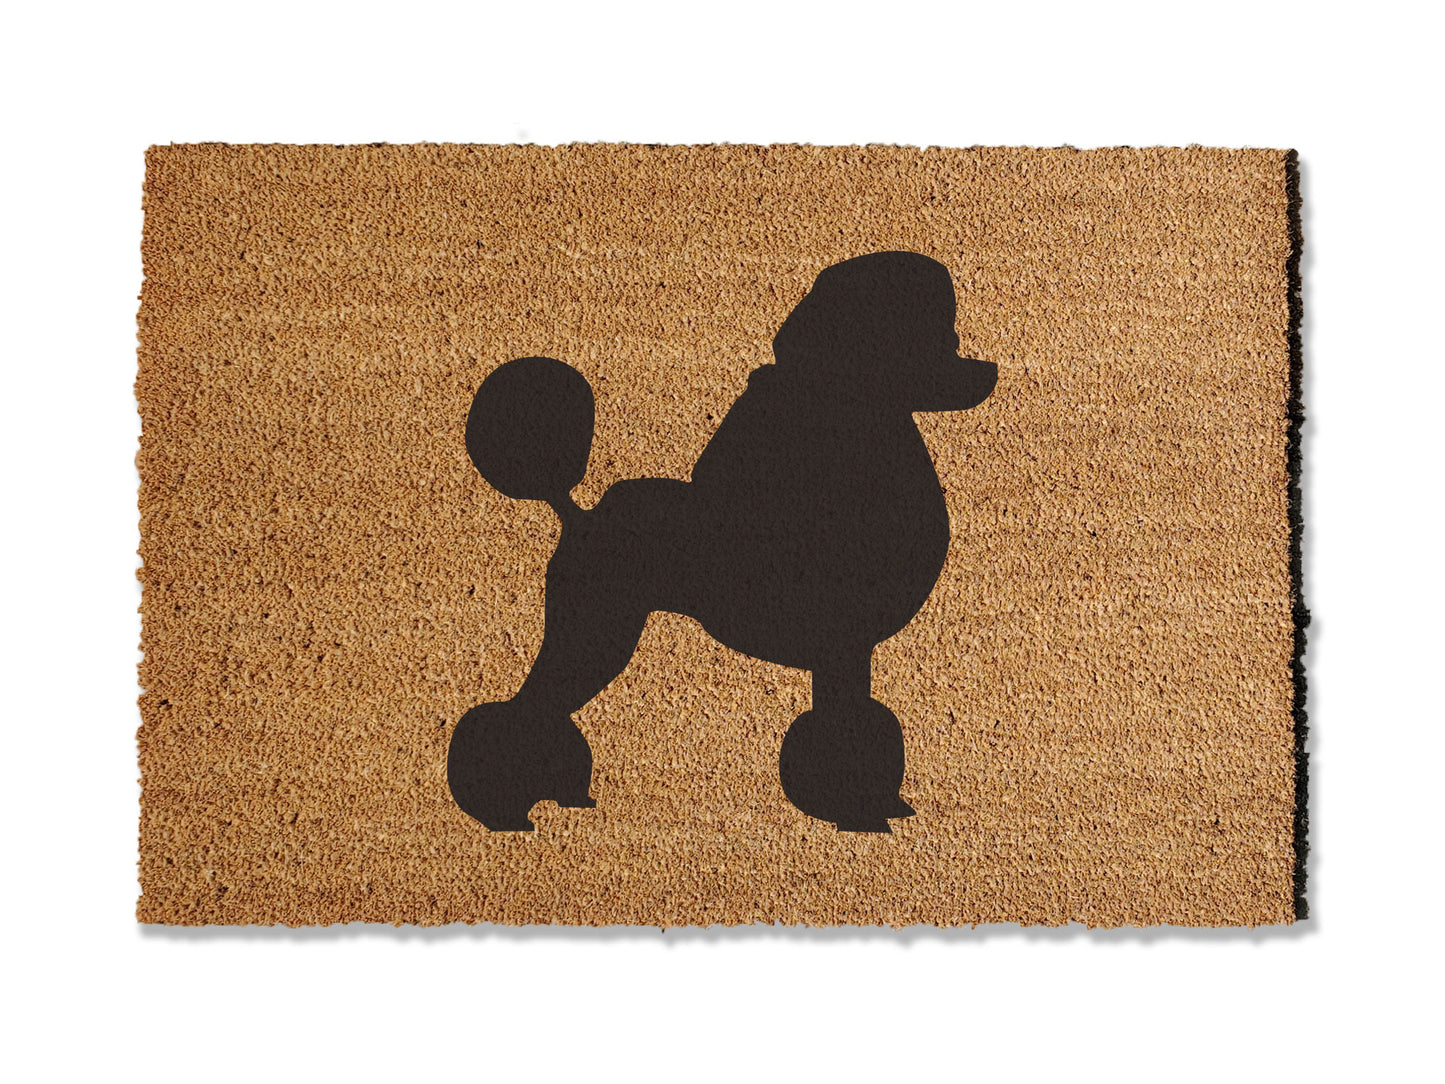 Coir doormat featuring an adorable Poodle design, ideal for dog lovers. This doormat is not only charming but also effective at trapping dirt. Available in multiple sizes to suit your entryway needs.